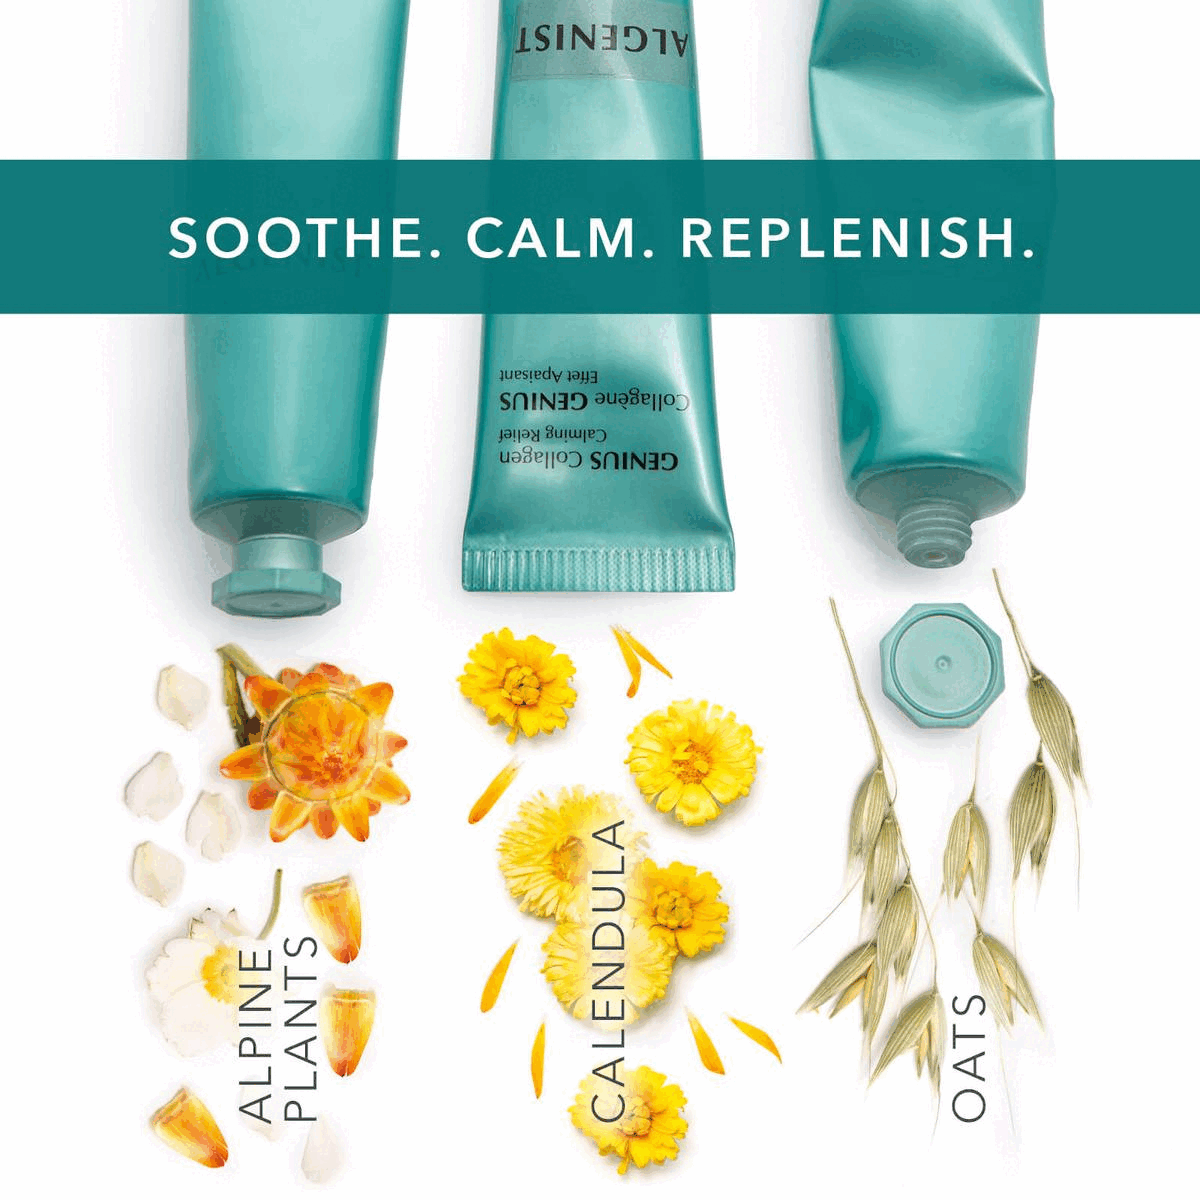 Image 1-Soothe.Calm.Replenish. Image 2- Benefits of the product